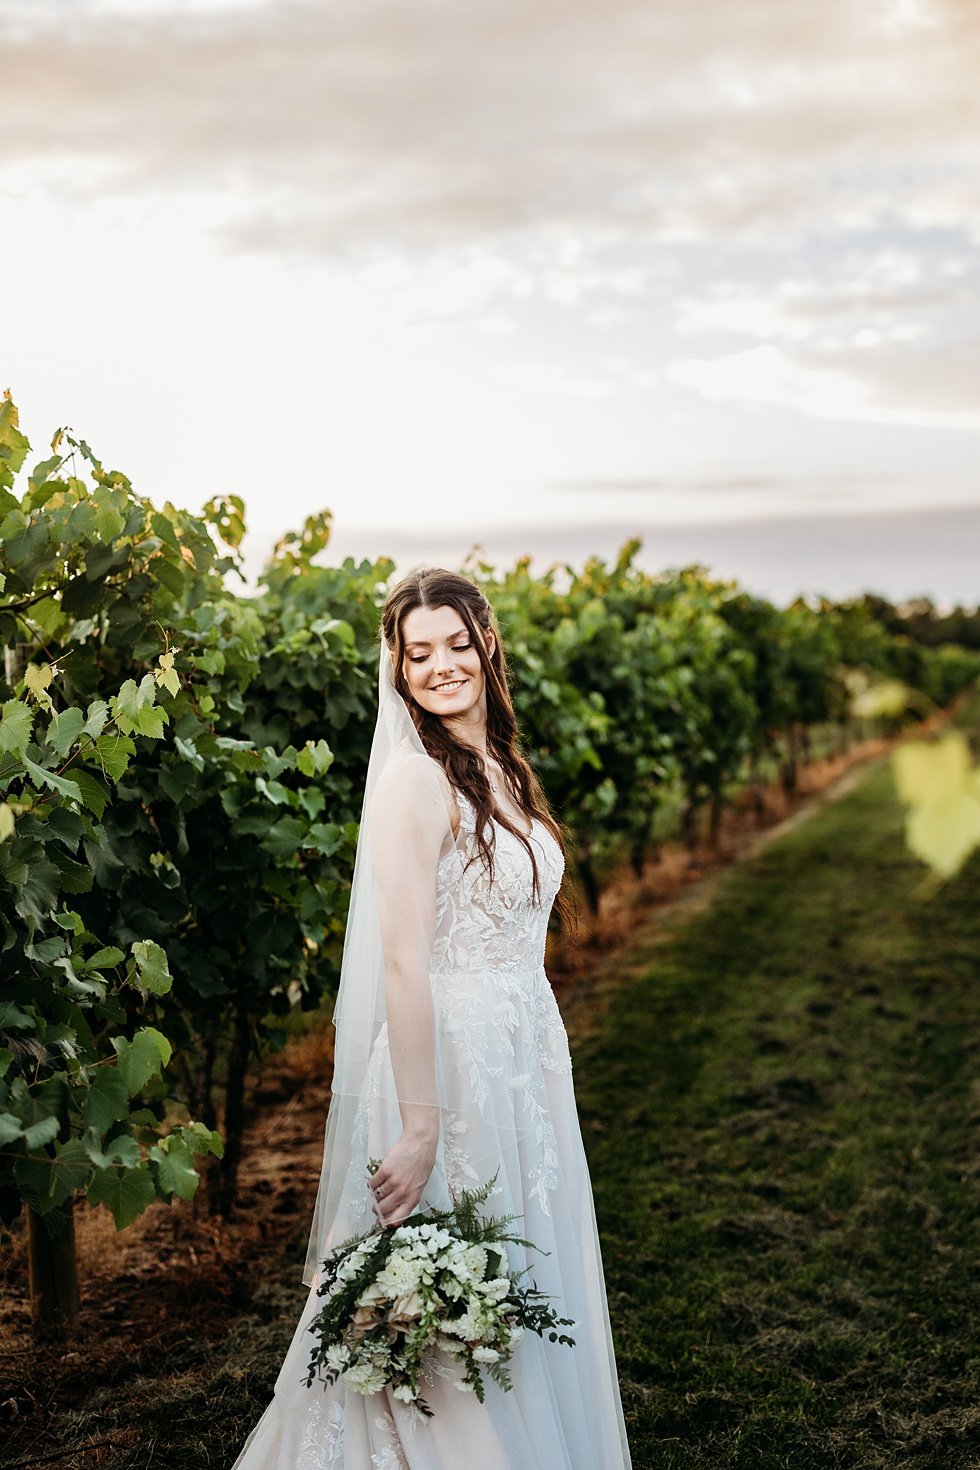  Sunset bridal portraits in vineyard. Wedding at Huber's Orchard and Winery in Starlight, Indiana. 